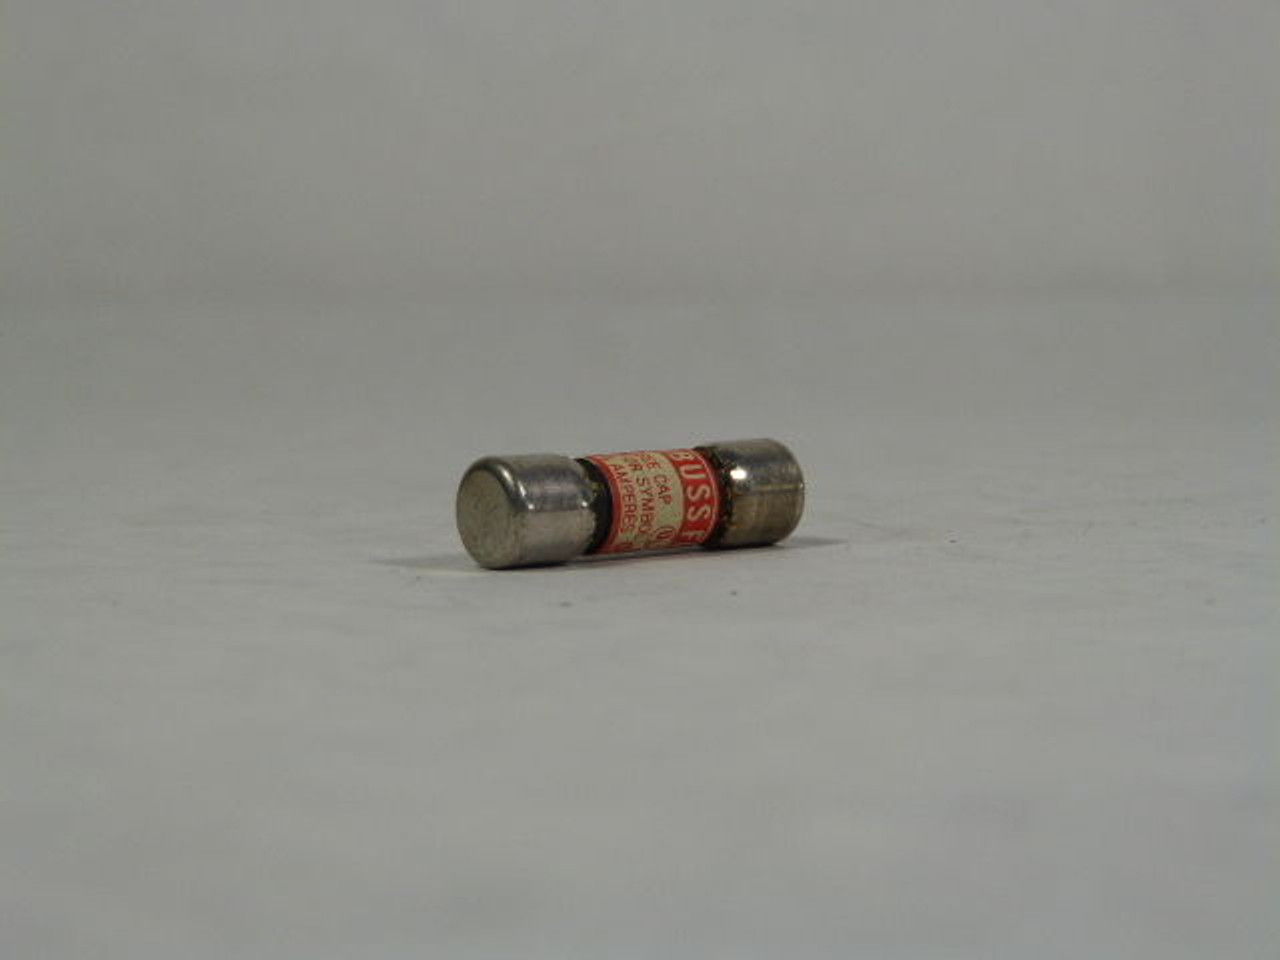 Bussmann BBS-4 Non-Indicating Fuse 4A 600V USED